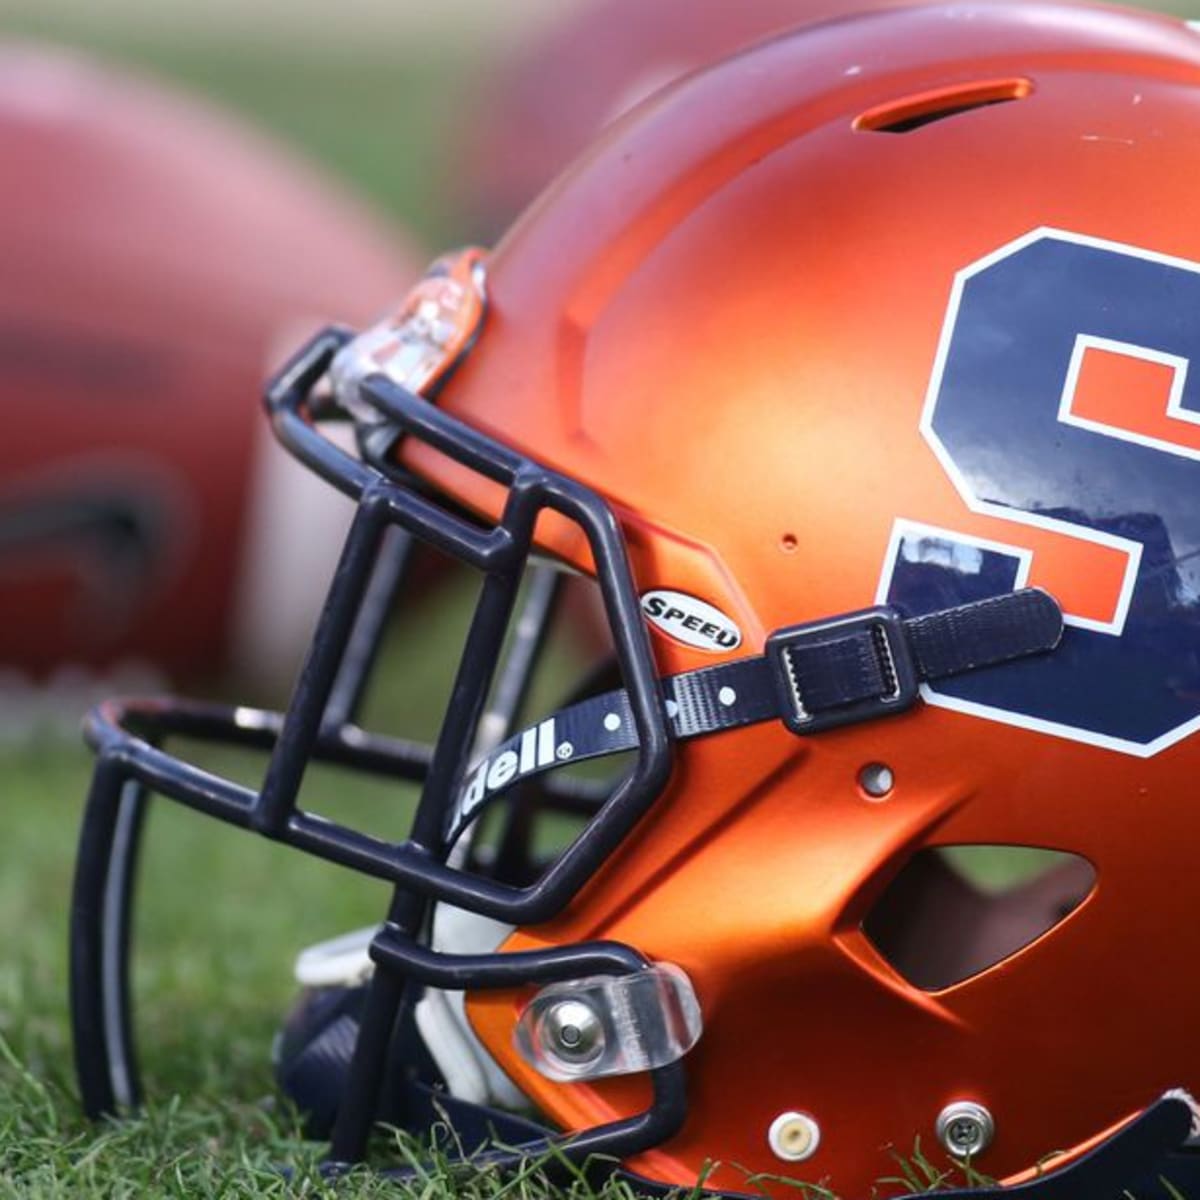 Mississippi State football hires Syracuse's Mike Schmidt, makes